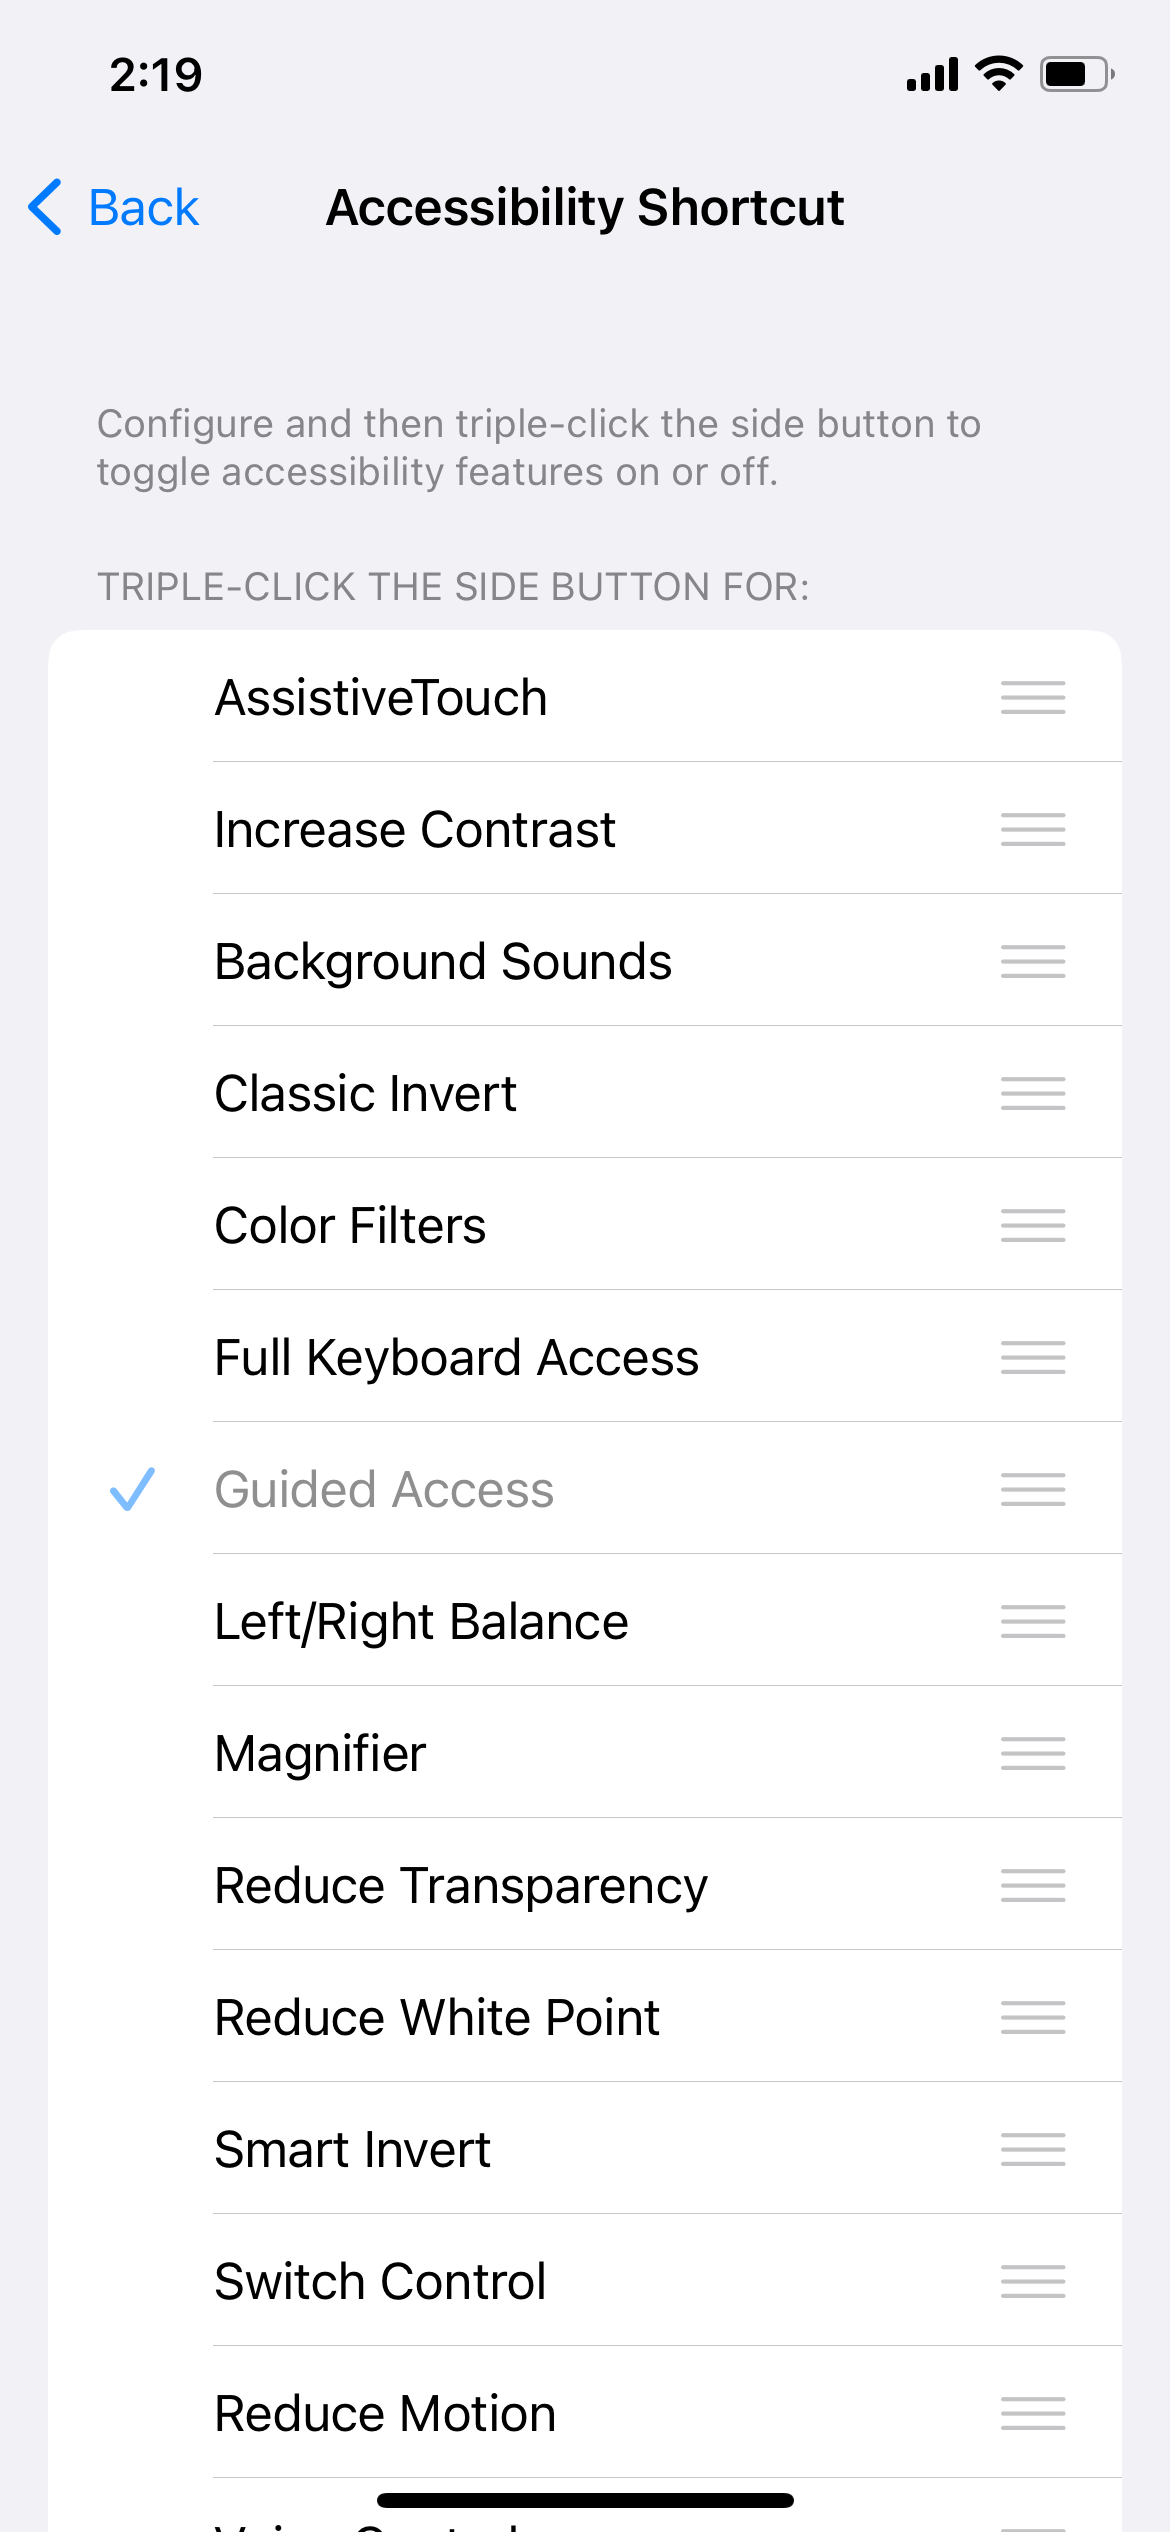 Choosing an Accessibility feature for Accessibility shortcut